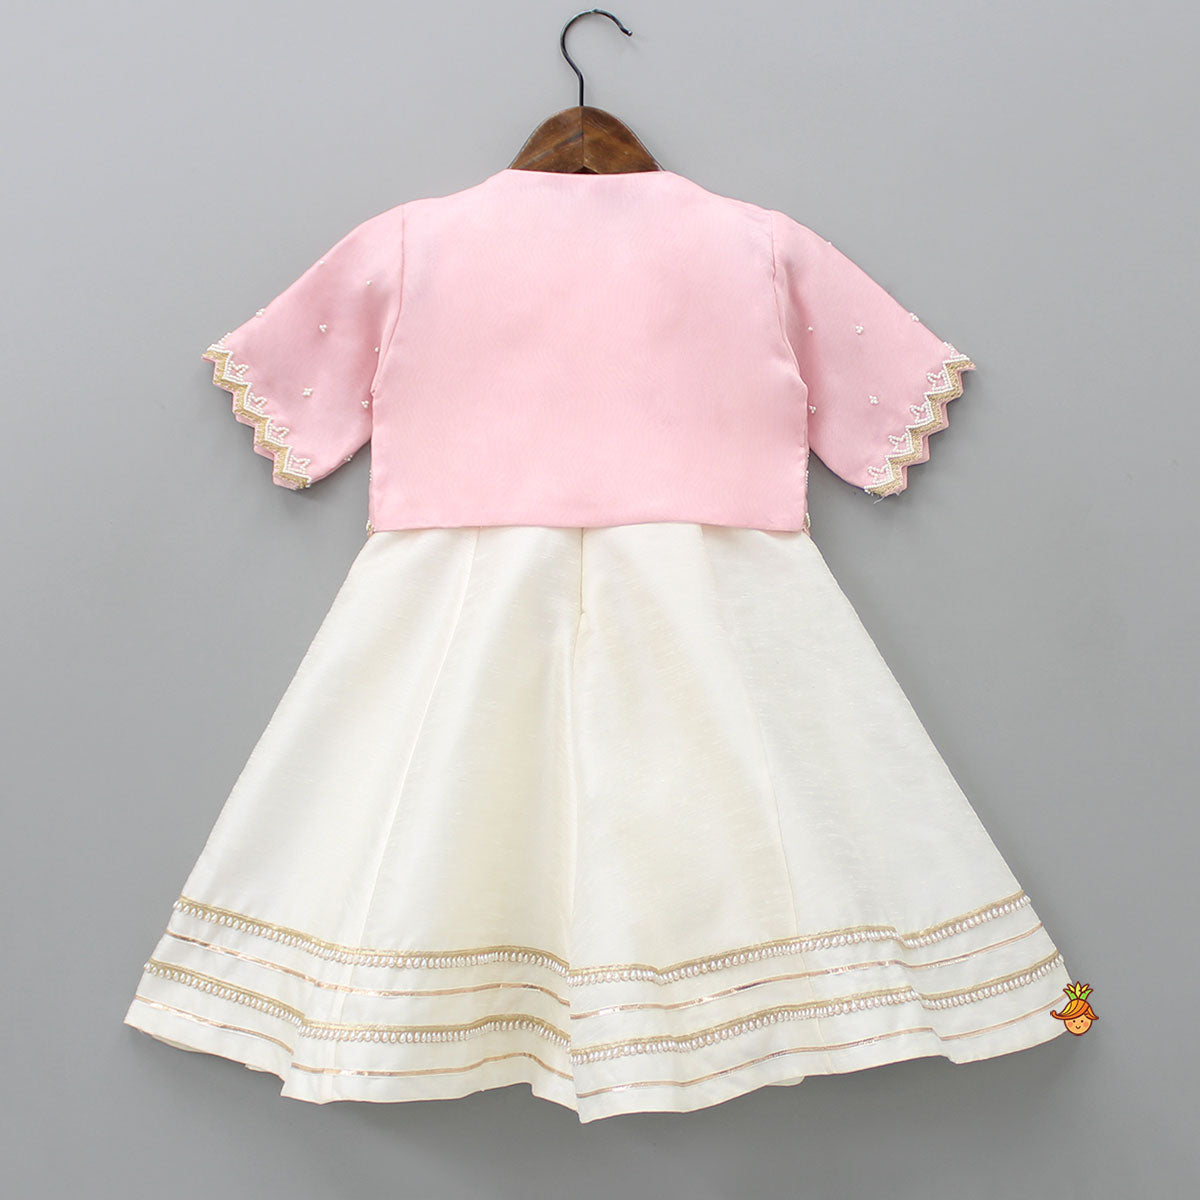 Pre Order: Off White Kurti With Pink Organza Jacket